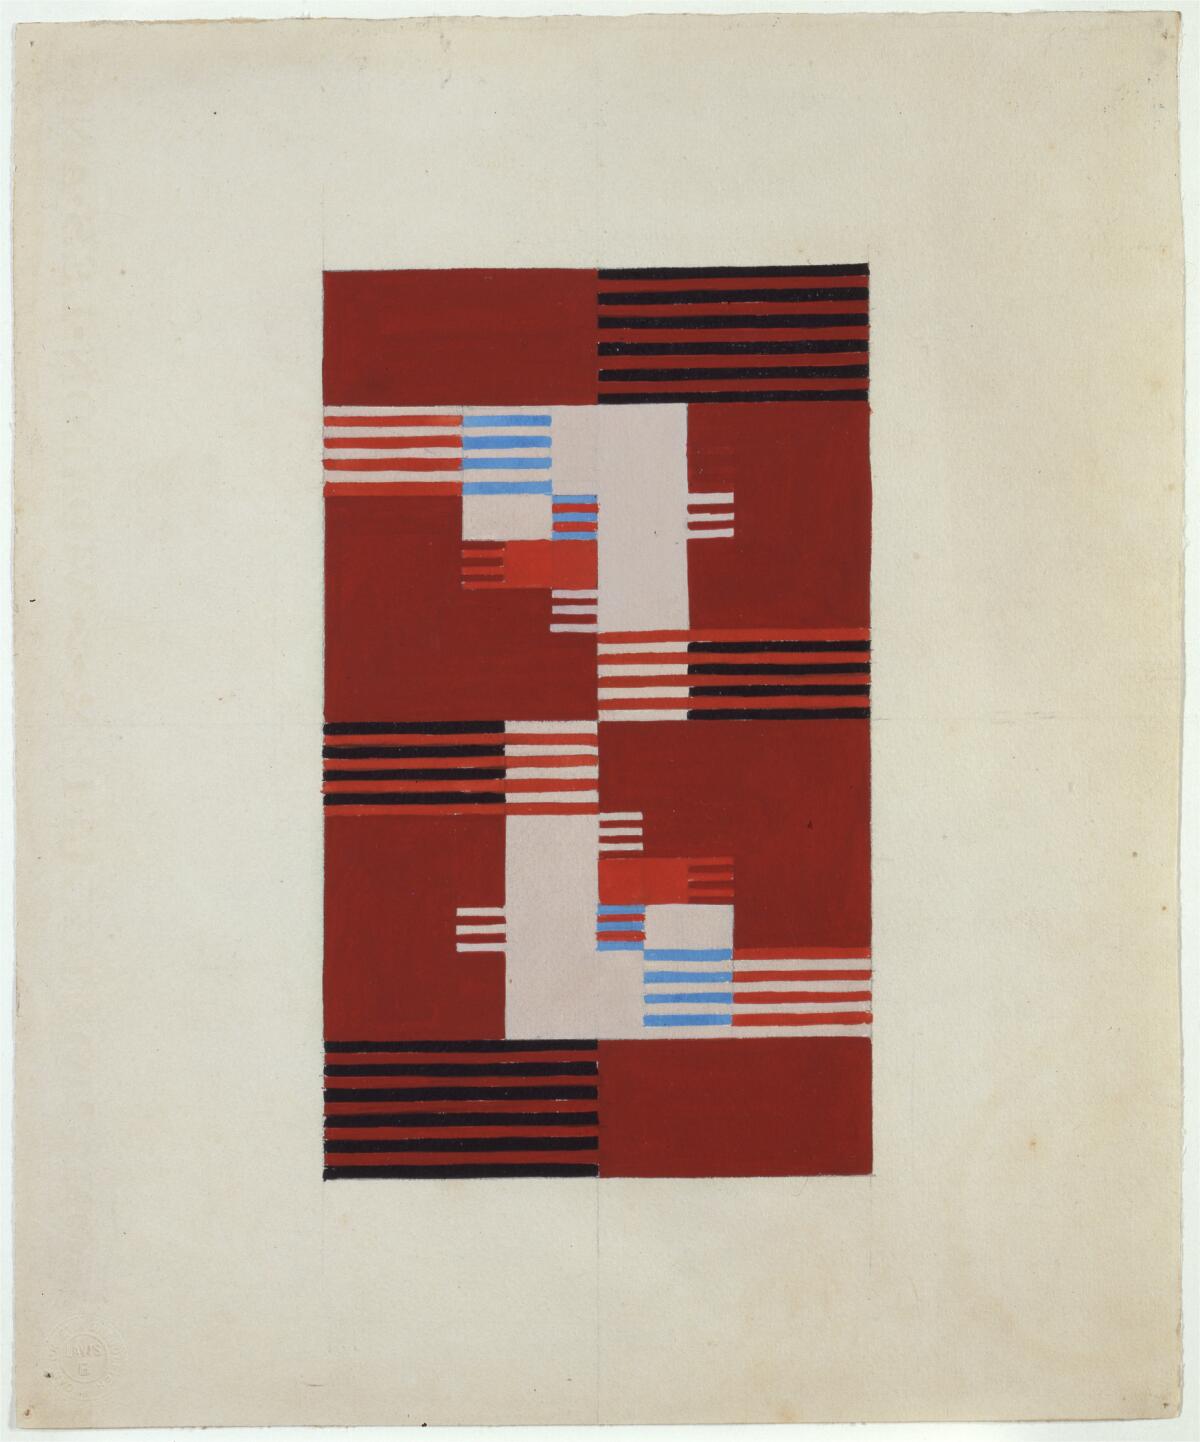 A work of art on red paper with white, blue, red and black lines.